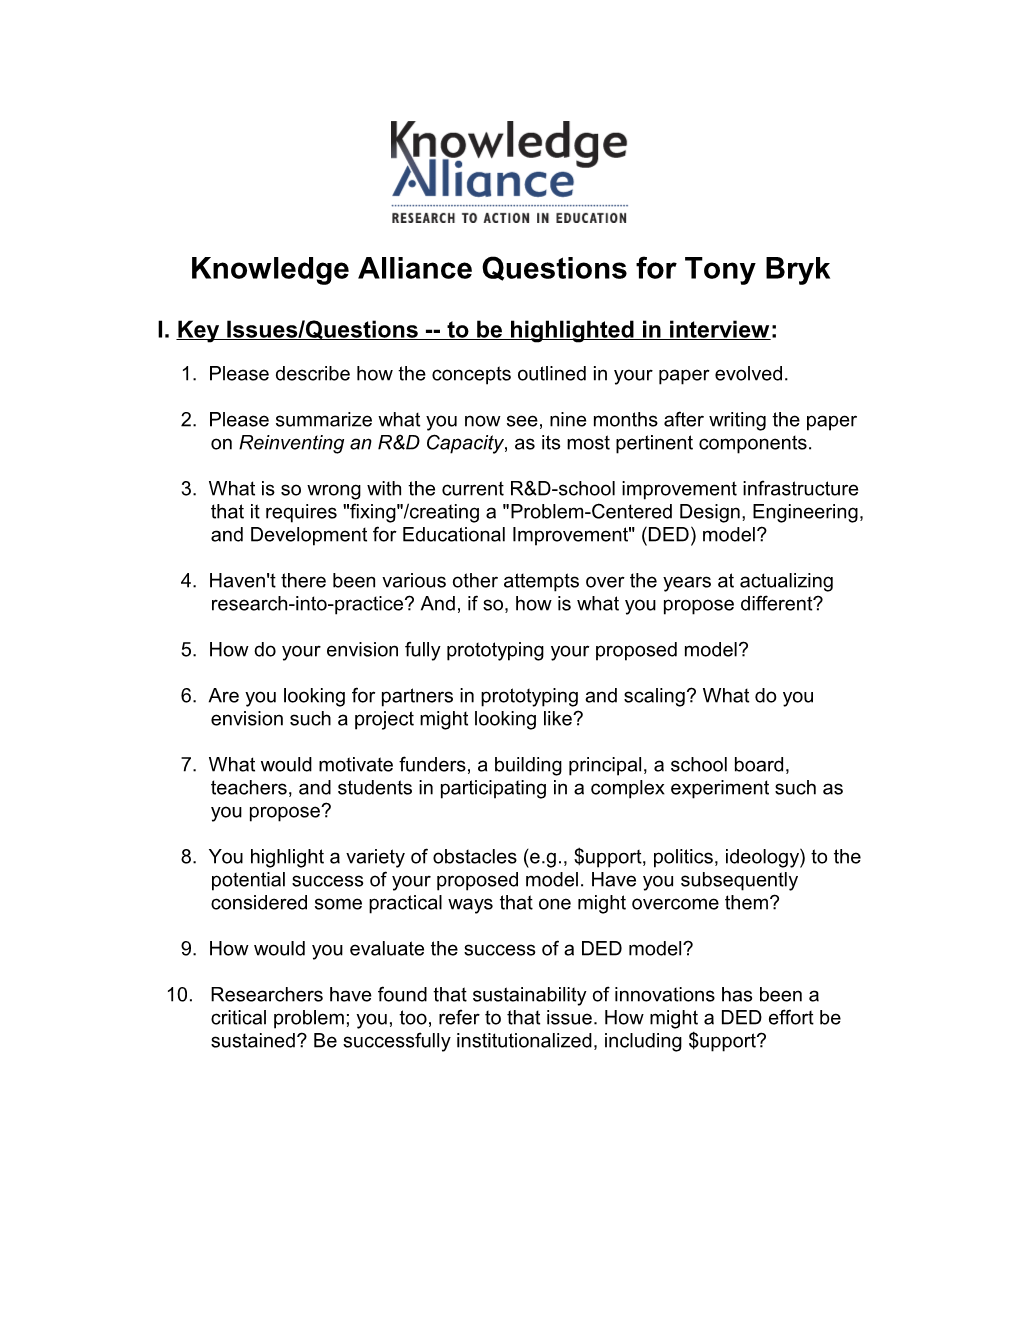 Knowledge Alliance Questions for Tony Bryk